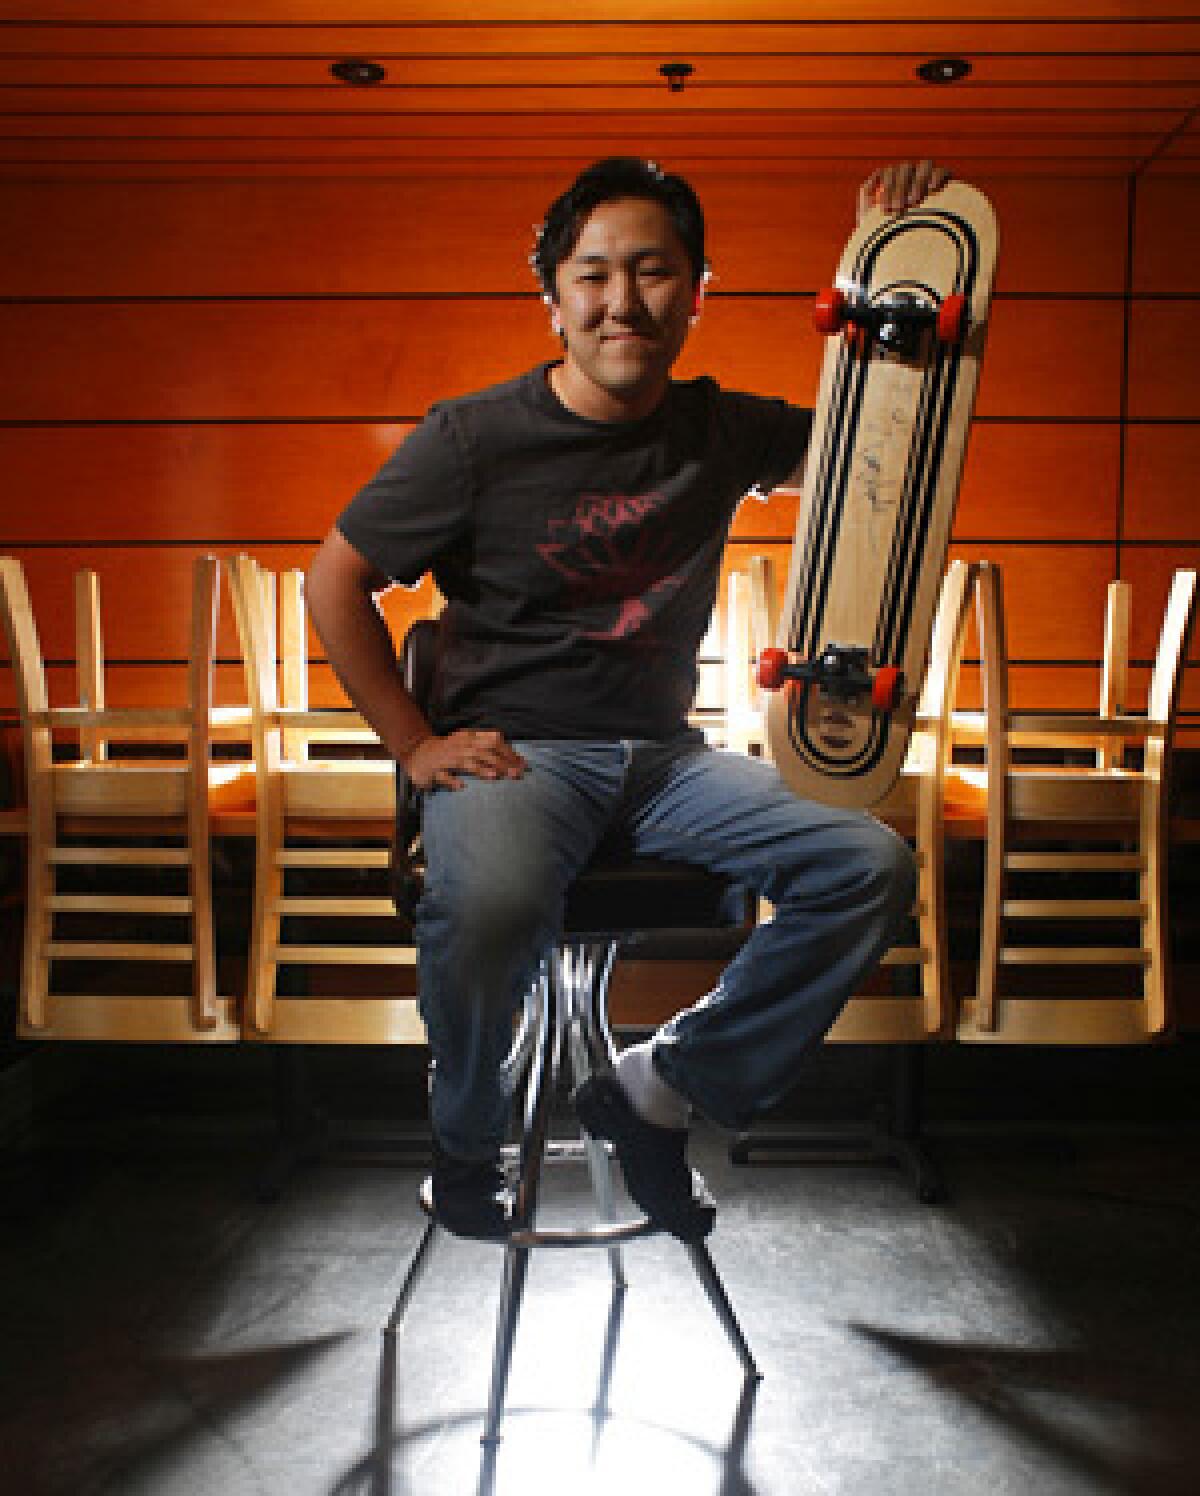 NOT FOR RIDING: Sang Yoon, owner and chef of Fathers Office, brings out his prize board signed by skater Tony Hawk.